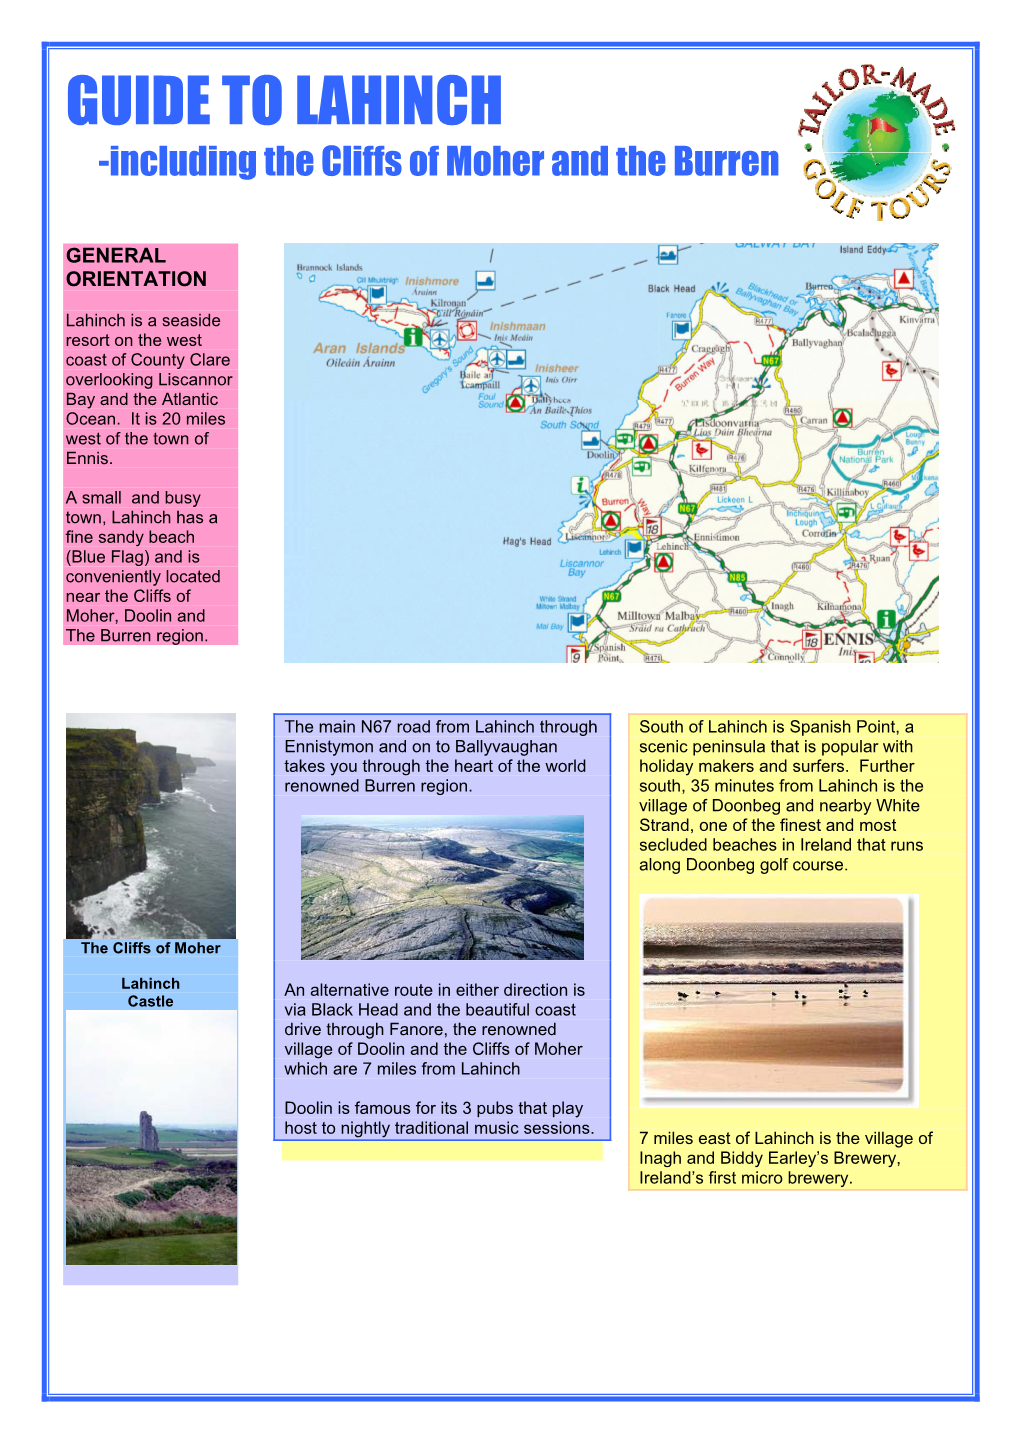 GUIDE to LAHINCH -Including the Cliffs of Moher and the Burren